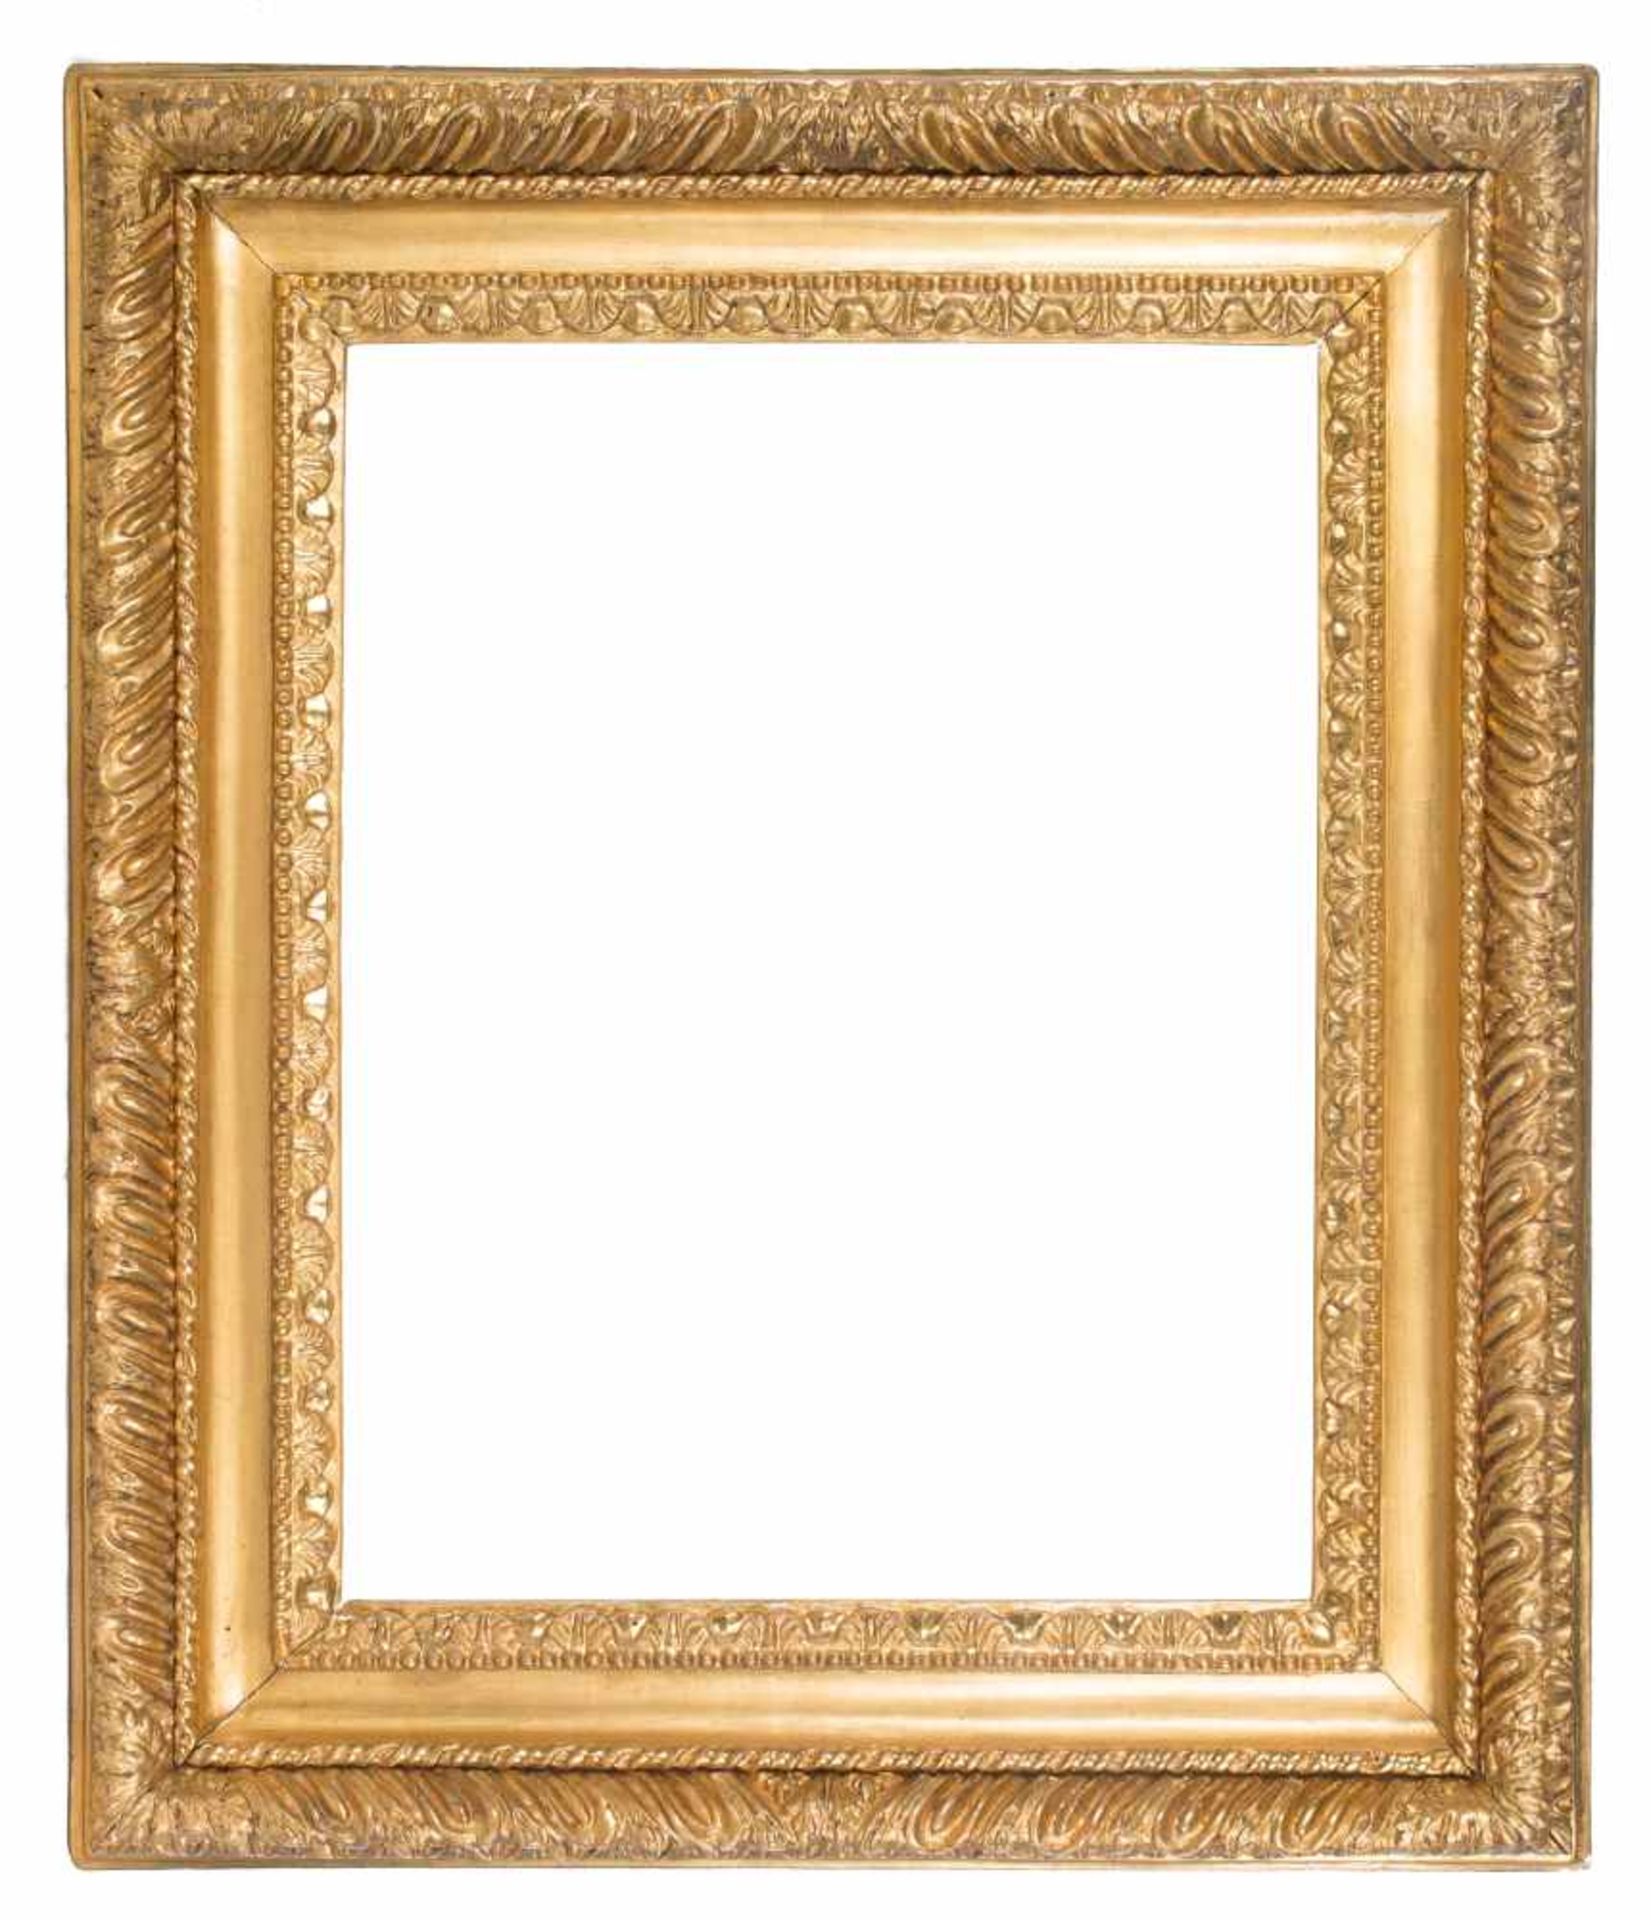 Carved and gilded wooden frame. Italy. 18th century.